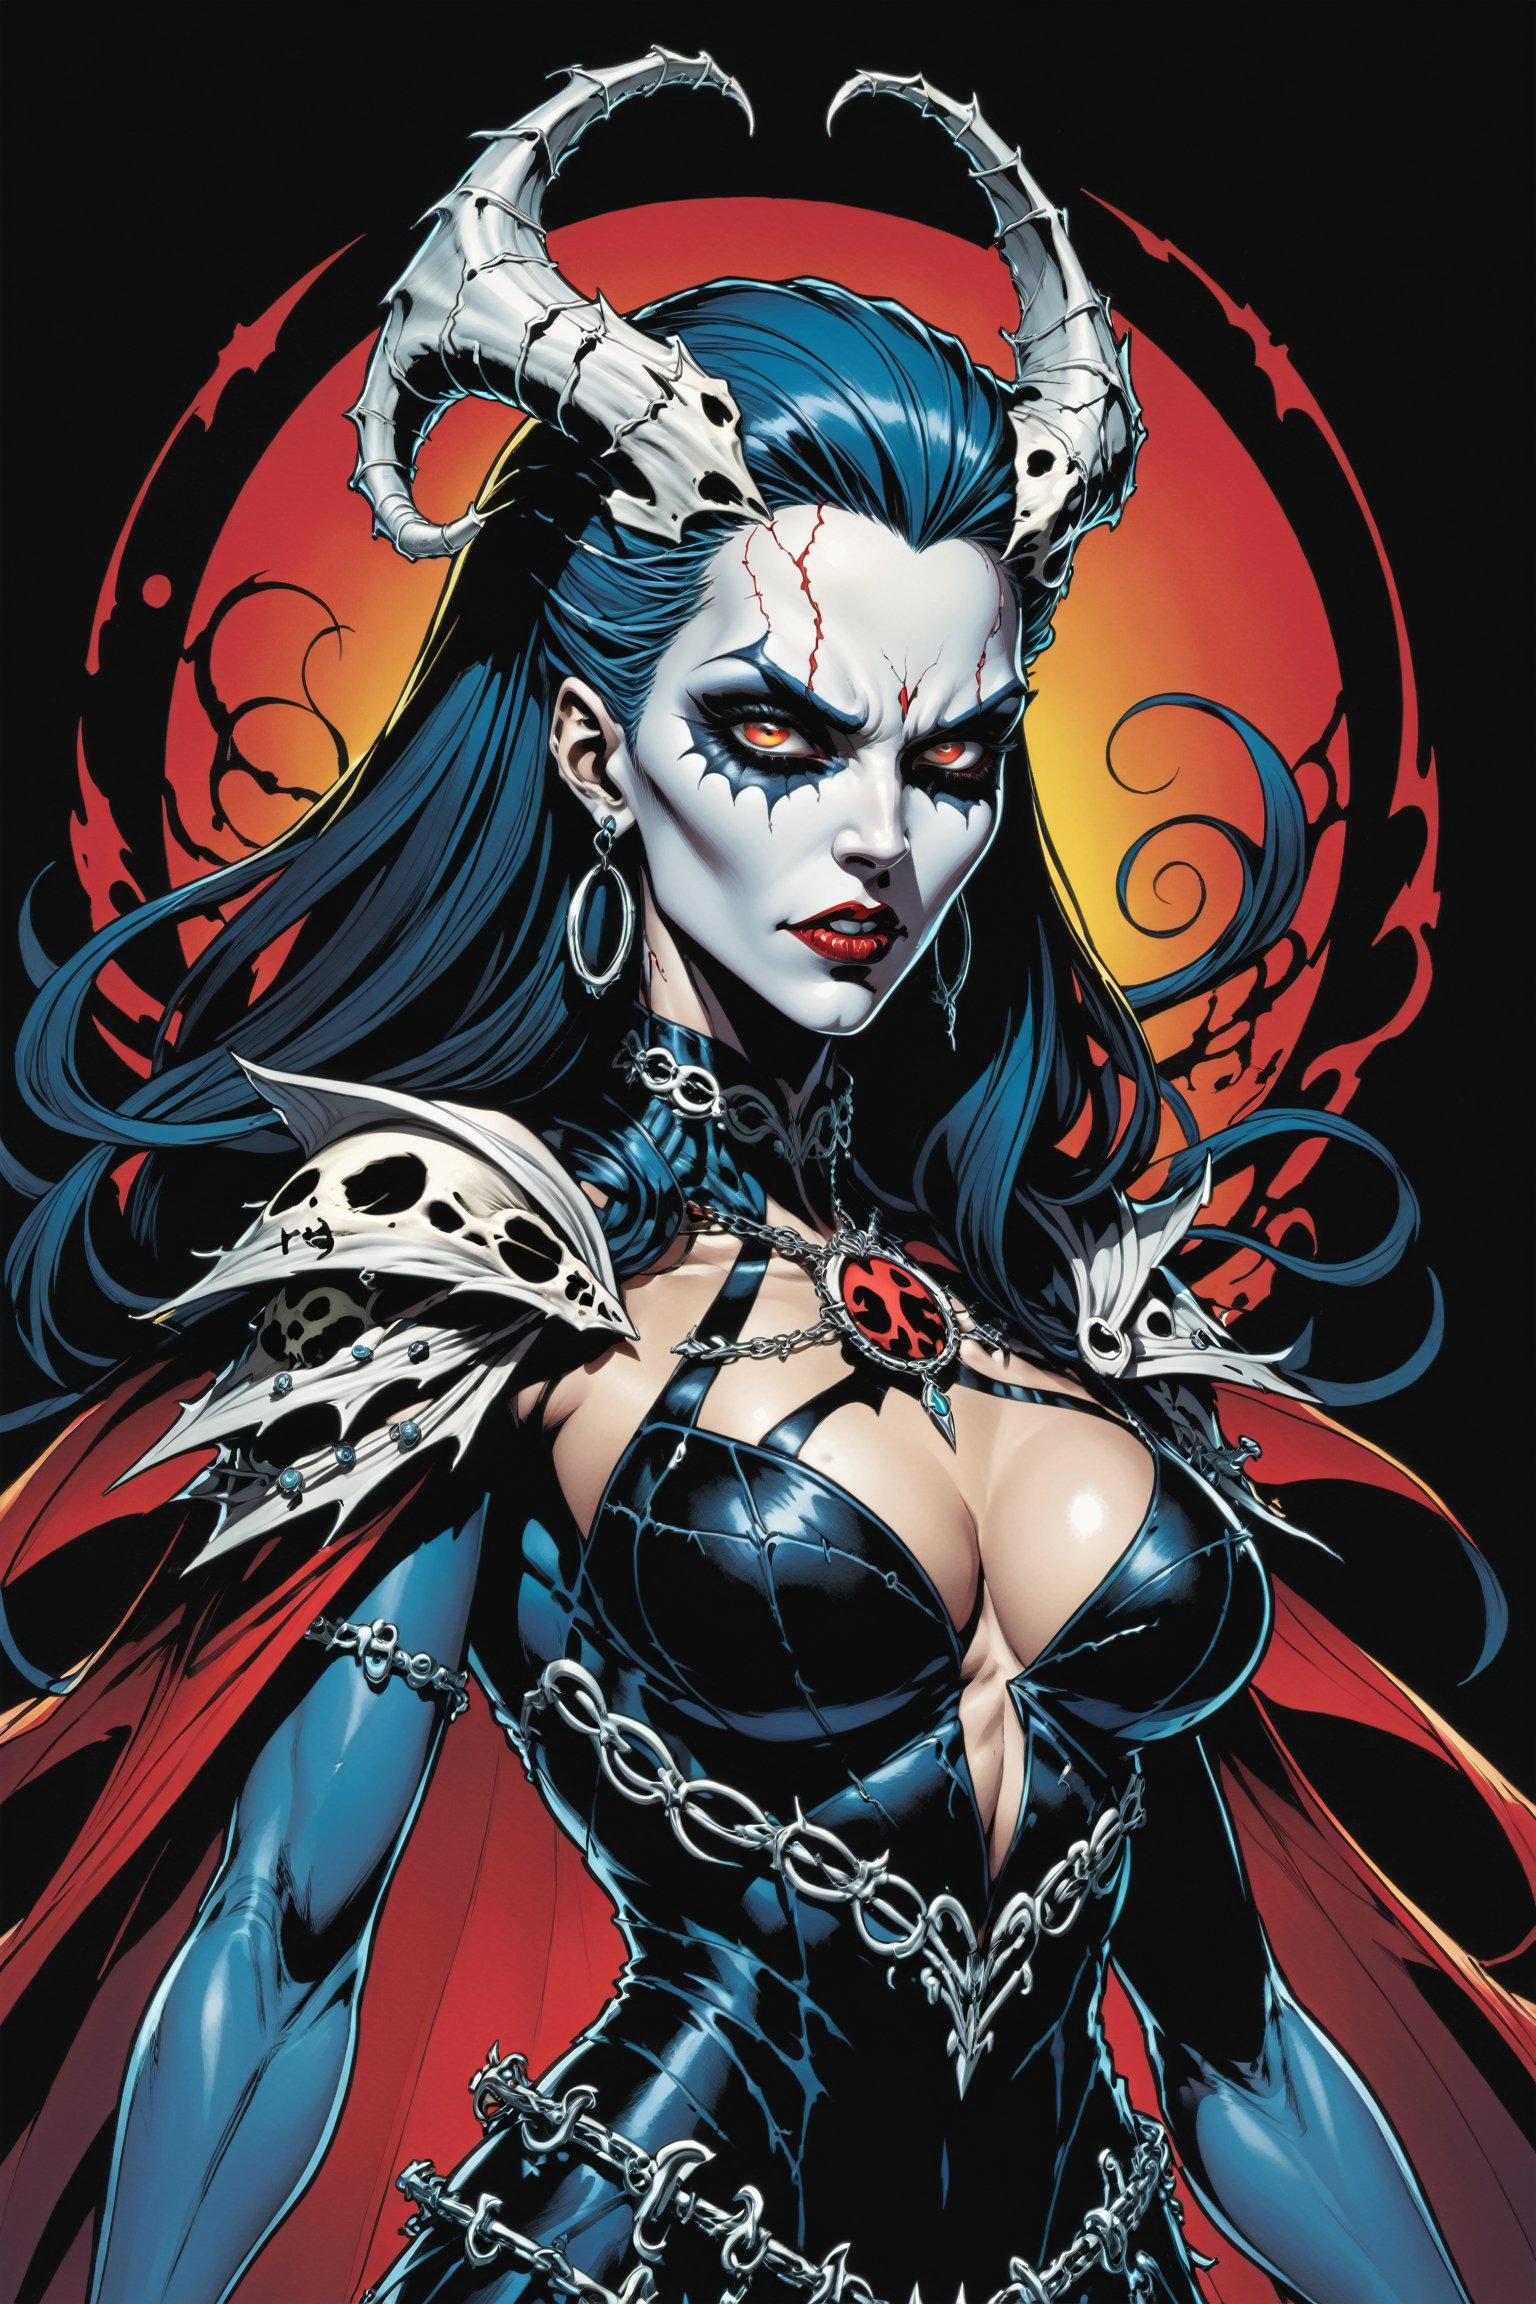 midshot, cel-shading style, centered image, ultra detailed illustration of the comic character ((female Spawn Queen of the Damned by Todd McFarlane)), posing, Black, dress with a skull emblem, ((half Body)), ((View from behind)), (tetradic colors), inkpunk, ink lines, strong outlines, art by MSchiffer, bold traces, unframed, high contrast, cel-shaded, vector, 4k resolution, best quality, (chromatic aberration:1.8)